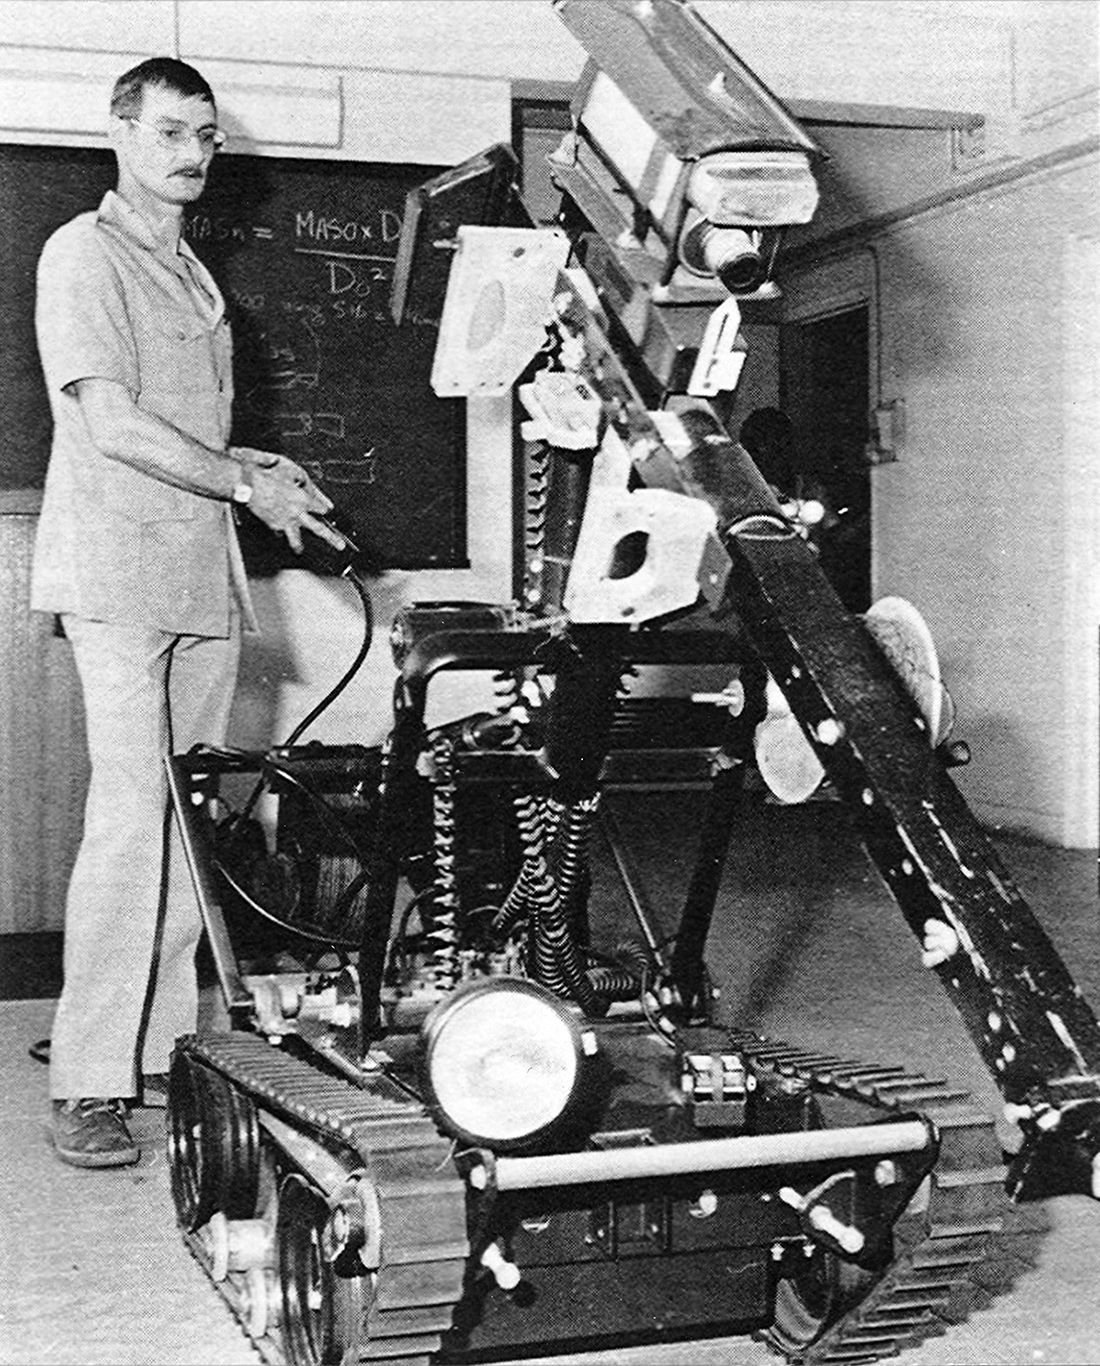 Bomb Disposal Officer demonstrated how to use the electrically powered track-driven “wheelbarrow” for handling bombs and terrorist devices, 1970s.